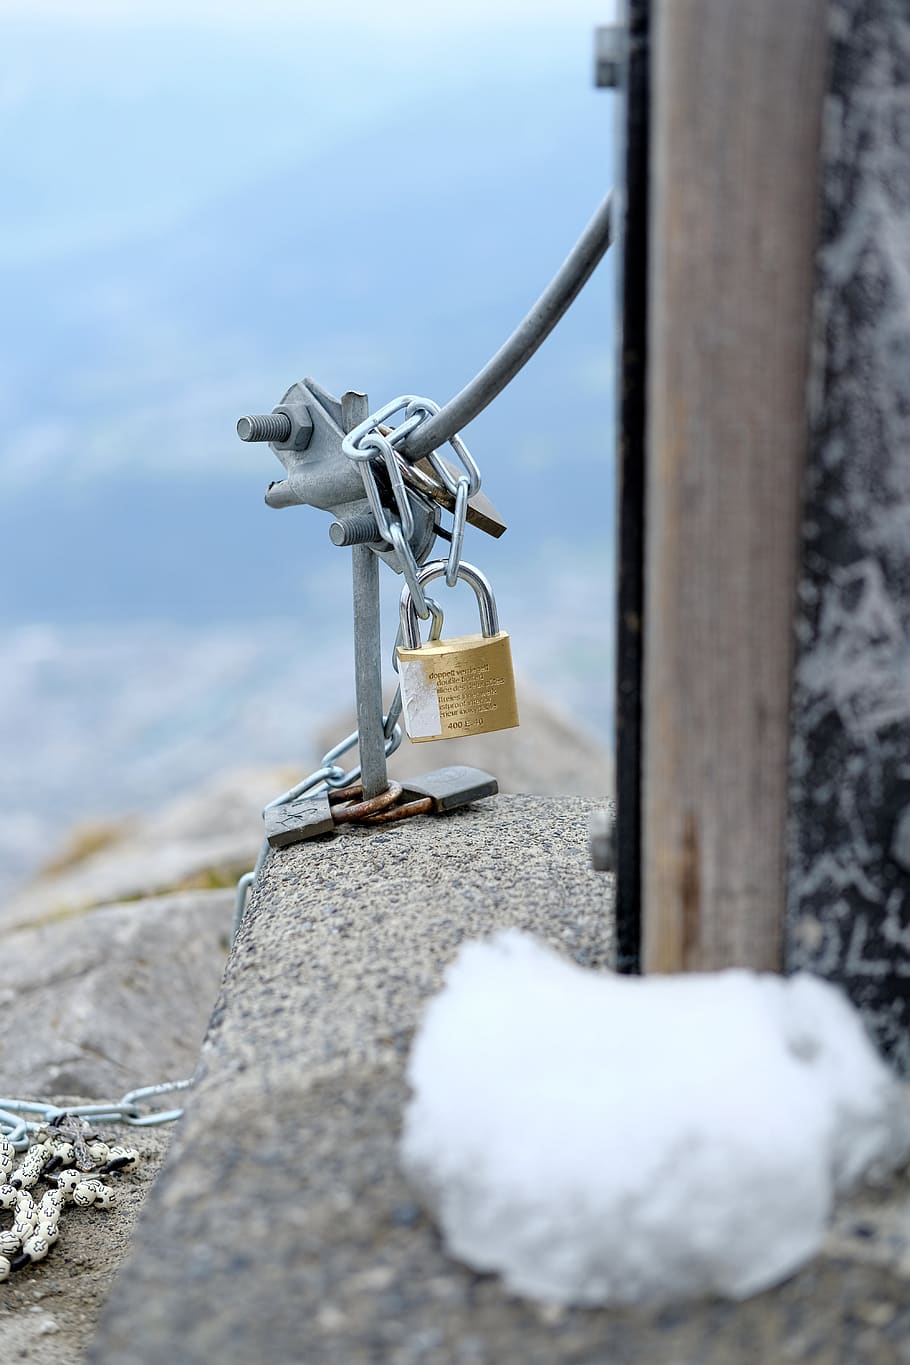 padlock, carbine, rope, mountain, snow, steel cable, object, day, metal, nature